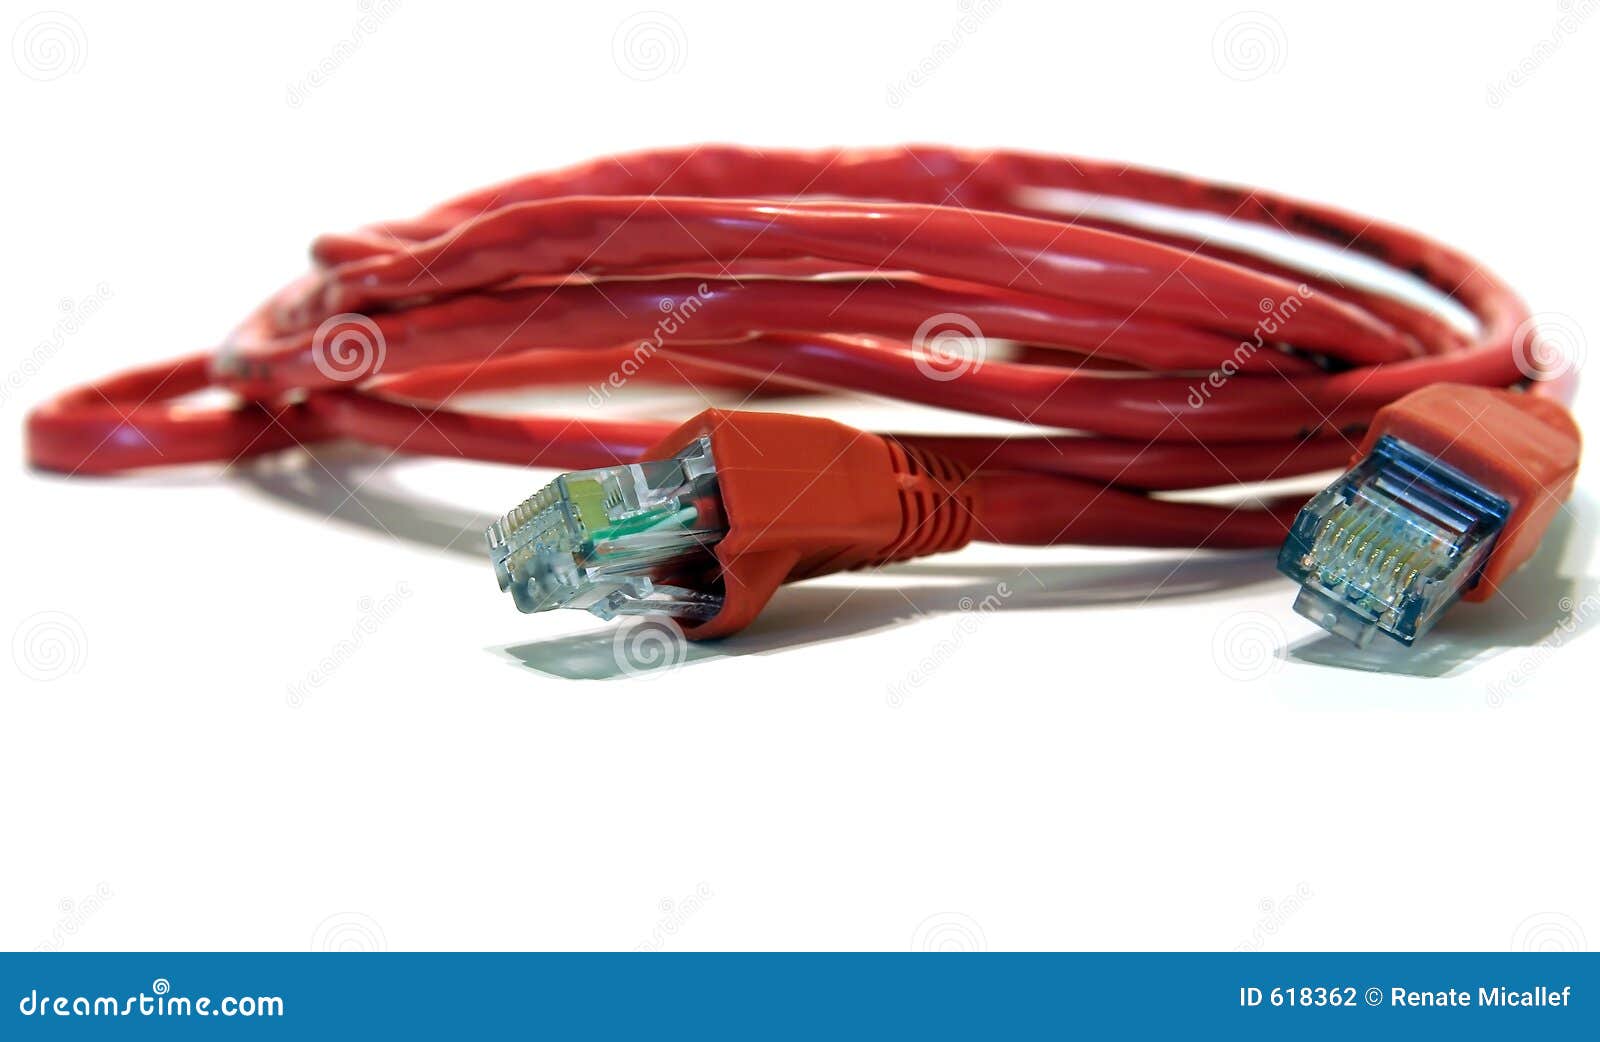 rj45 computer crossover data cable